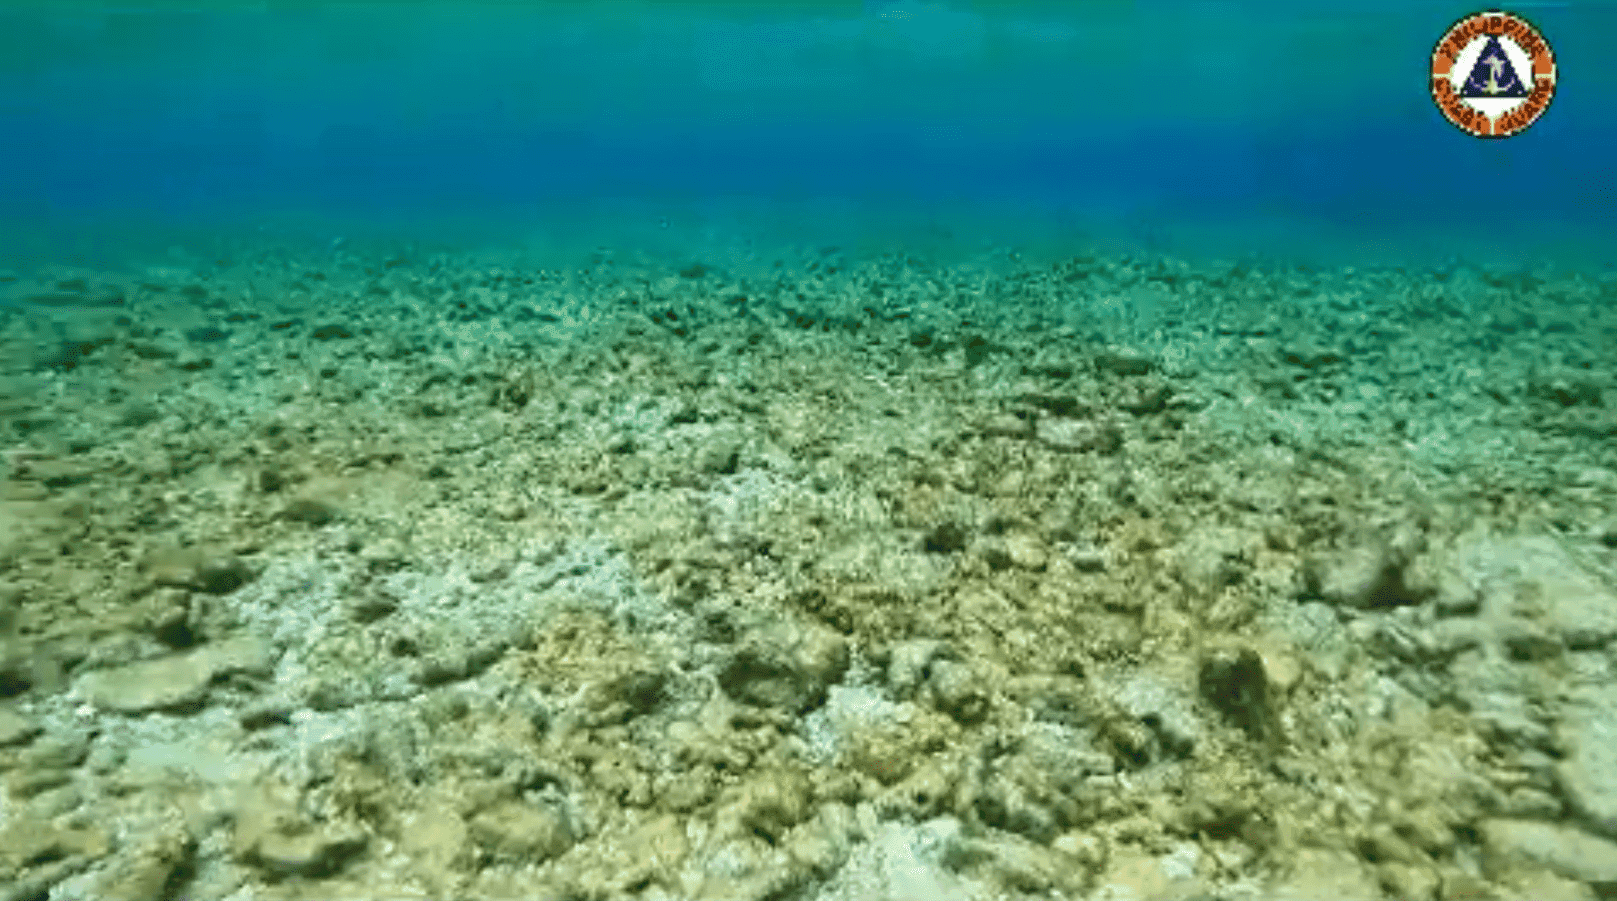 PCG confirms "extensive damage" in marine ecosystem, coral reef in WPS